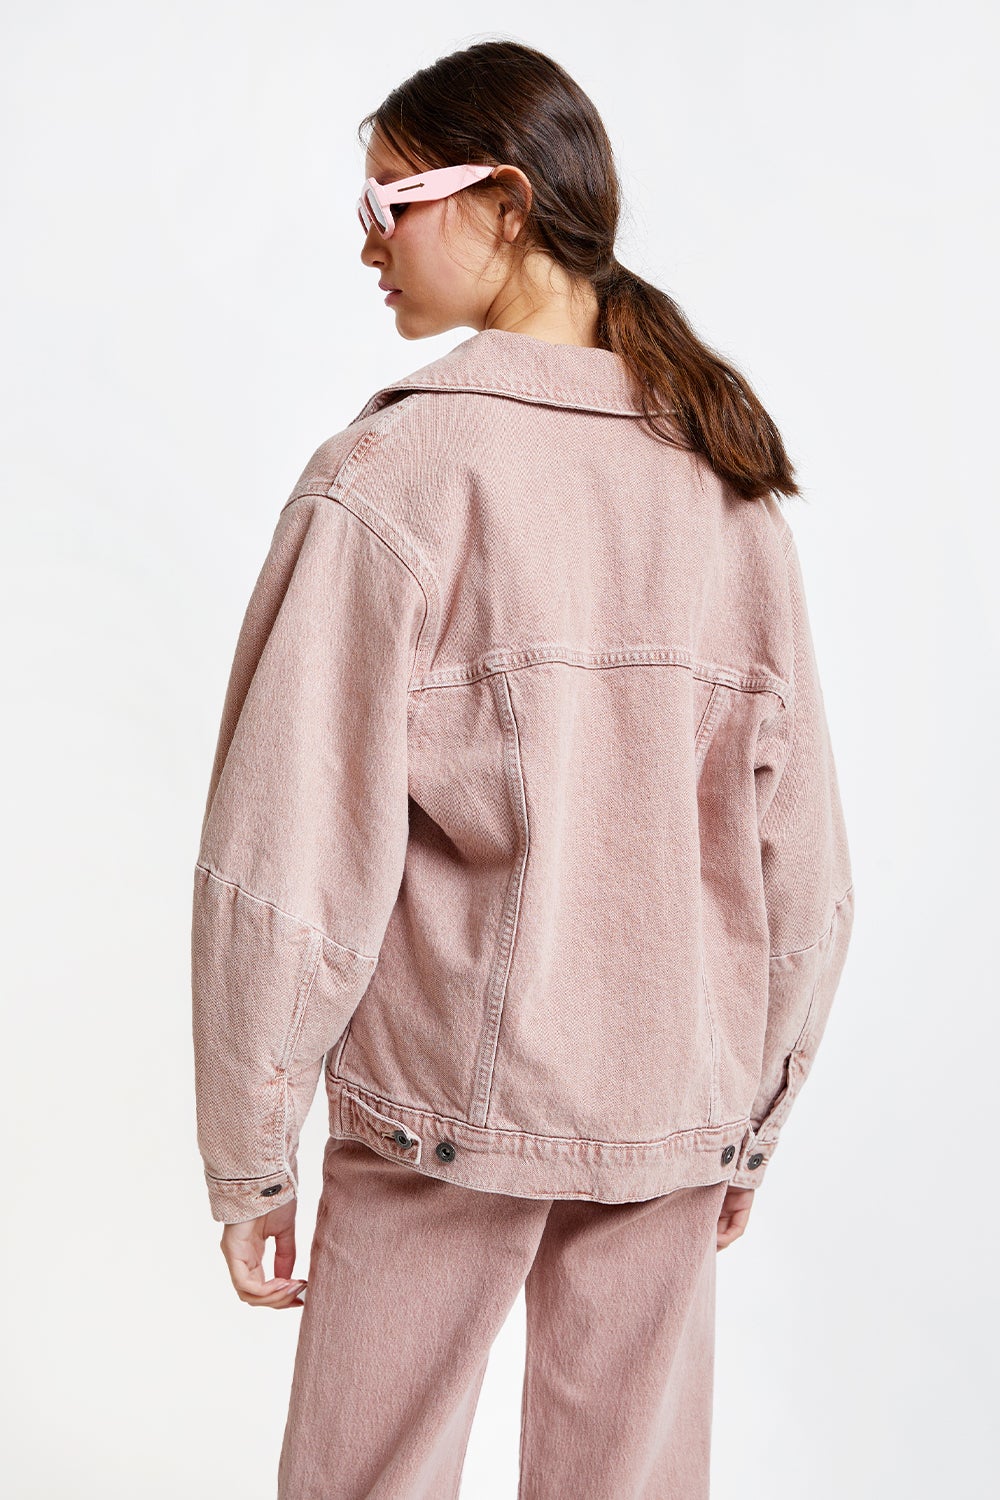 Levi's Made and Crafted Wedge Sleeve Trucker Jacket Pink Sands